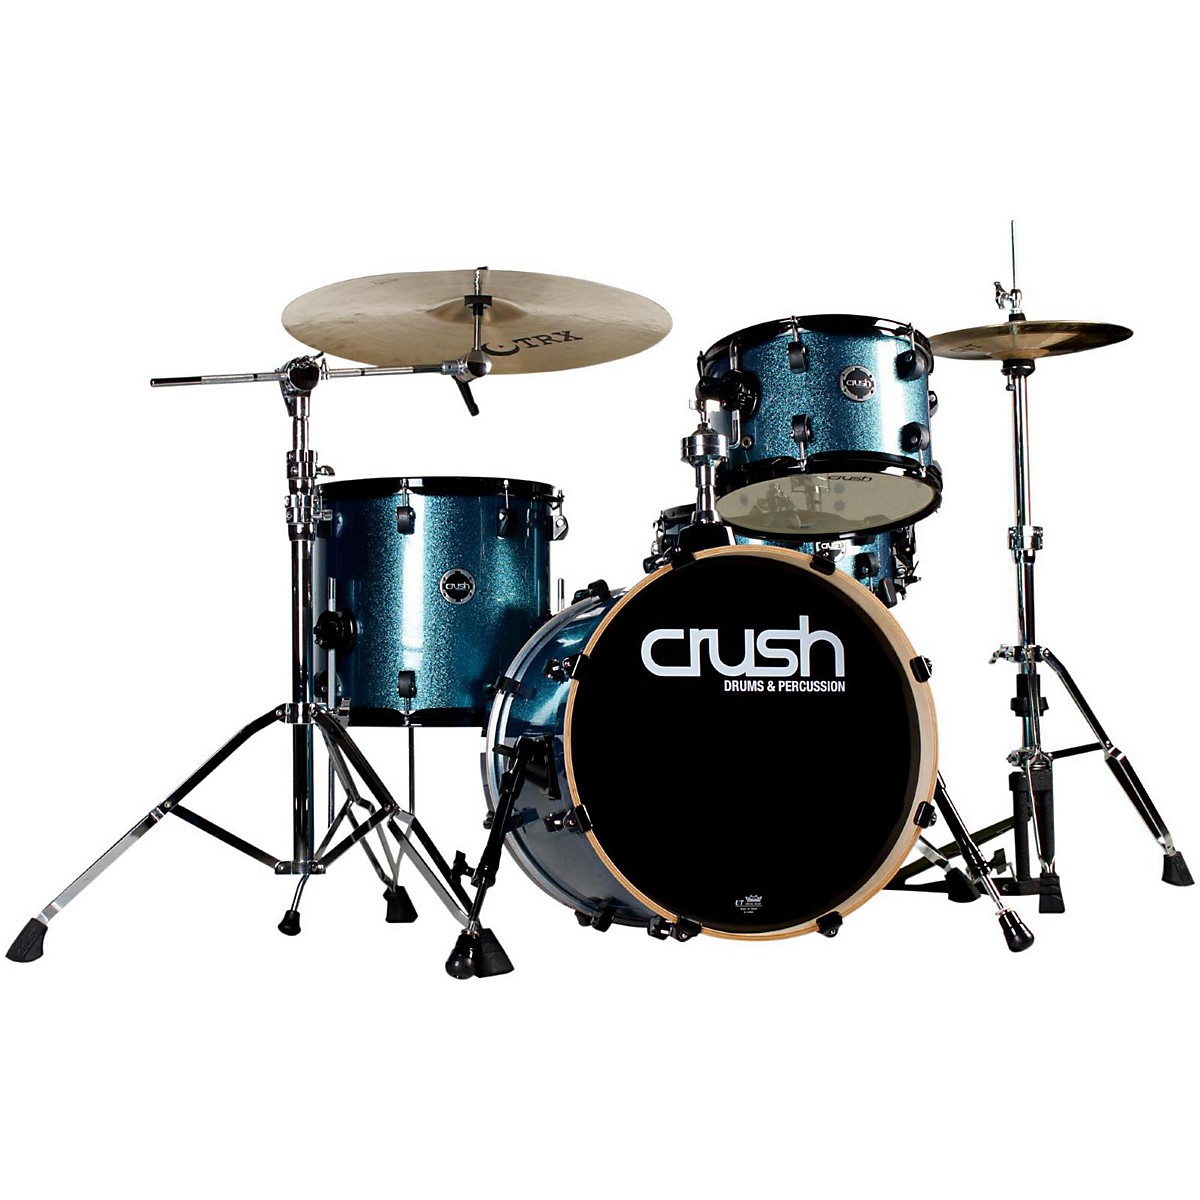 Crush Drums Percussion Chameleon Birch 4 Piece Shell Pack Bop Kit Guitar Center